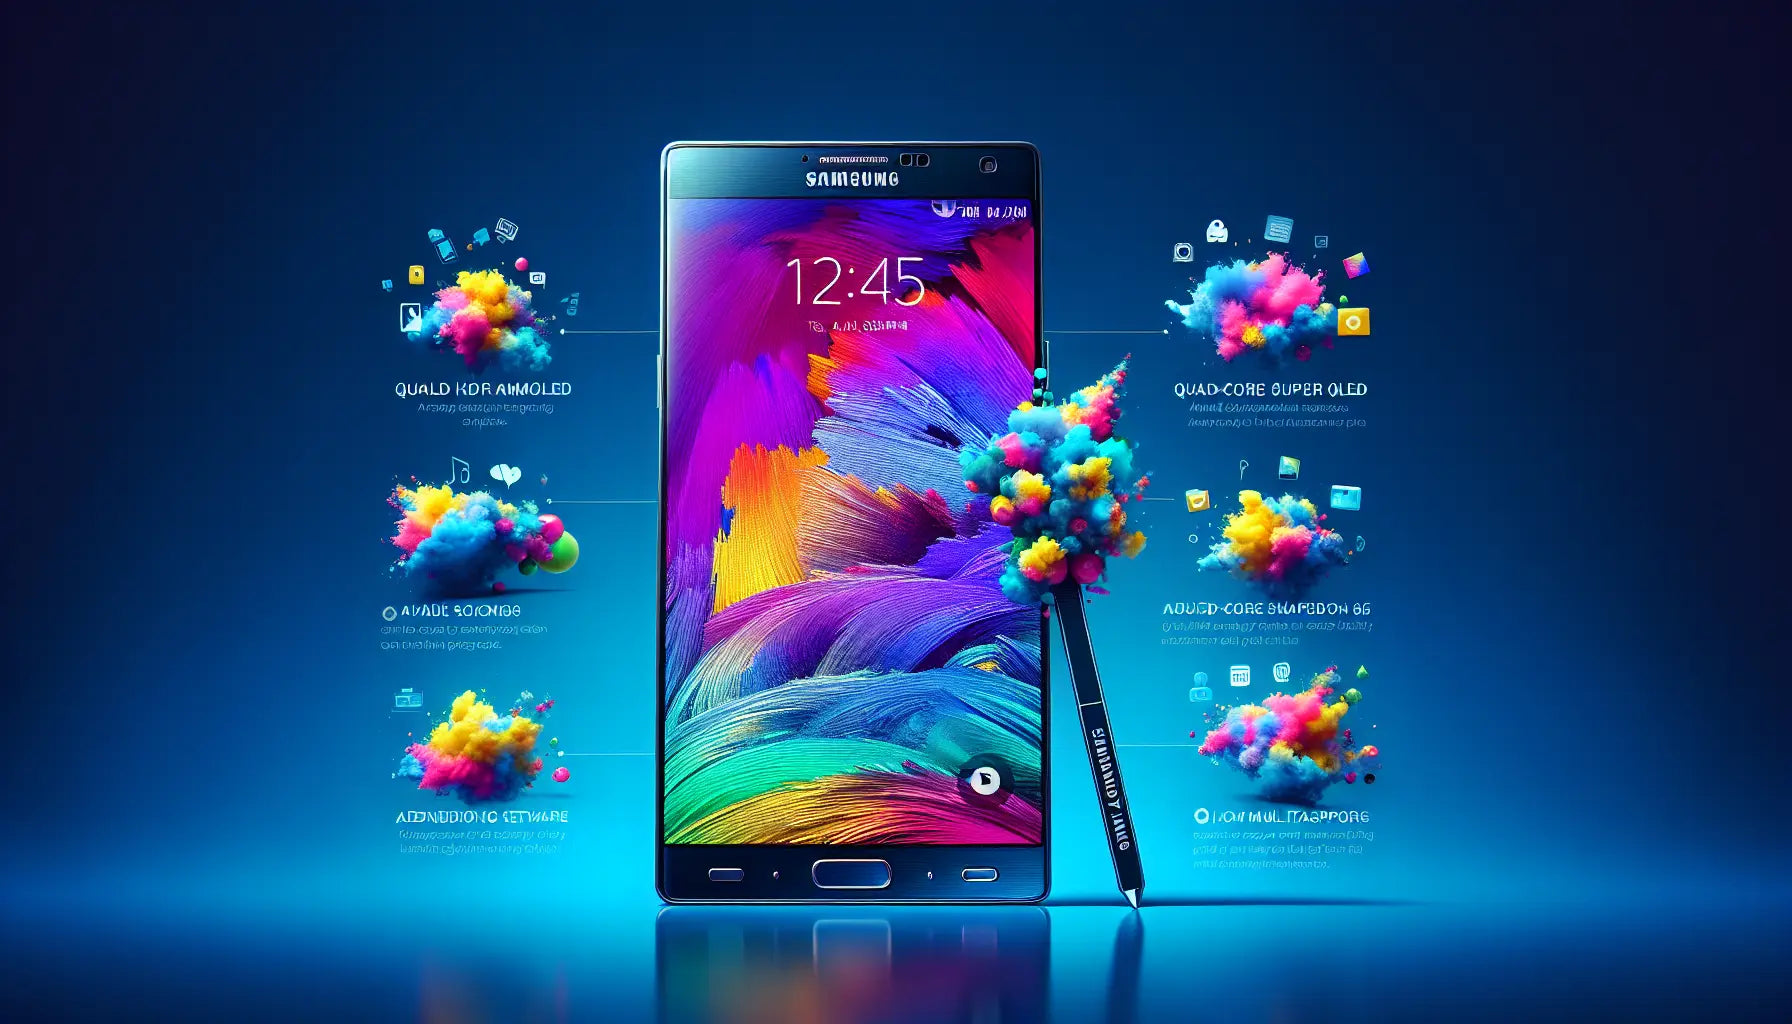 Discover the Amazing Samsung Galaxy Note 4